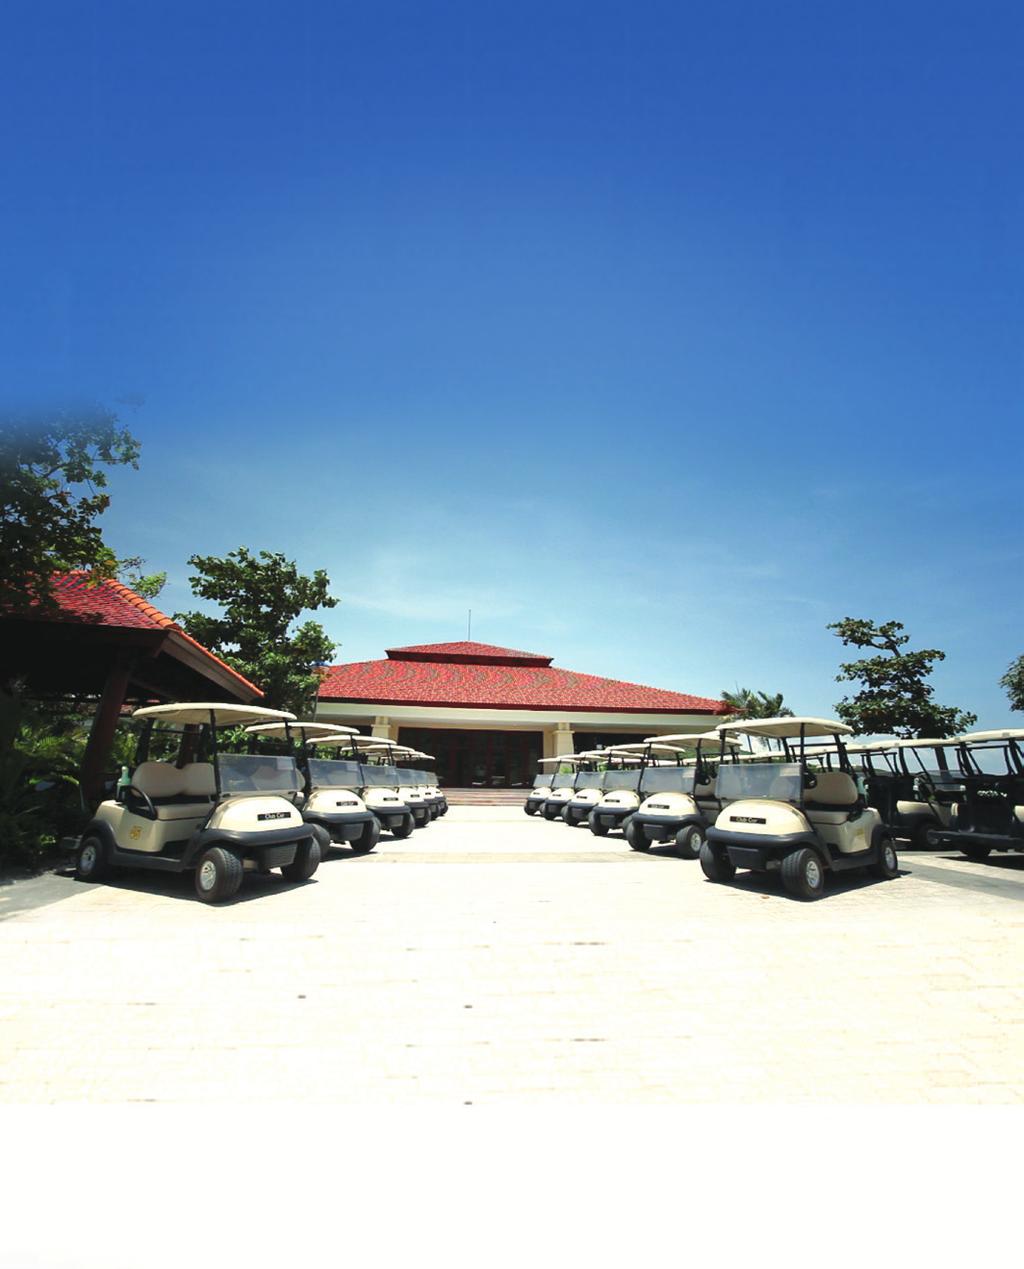 FACILITIES & SERVICES THE CLUBHOUSE RESTAURANT & BAR Ideally situated in the midst of the tropical forest, the clubhouse is designed in contemporary architectural style and elegantly equipped with